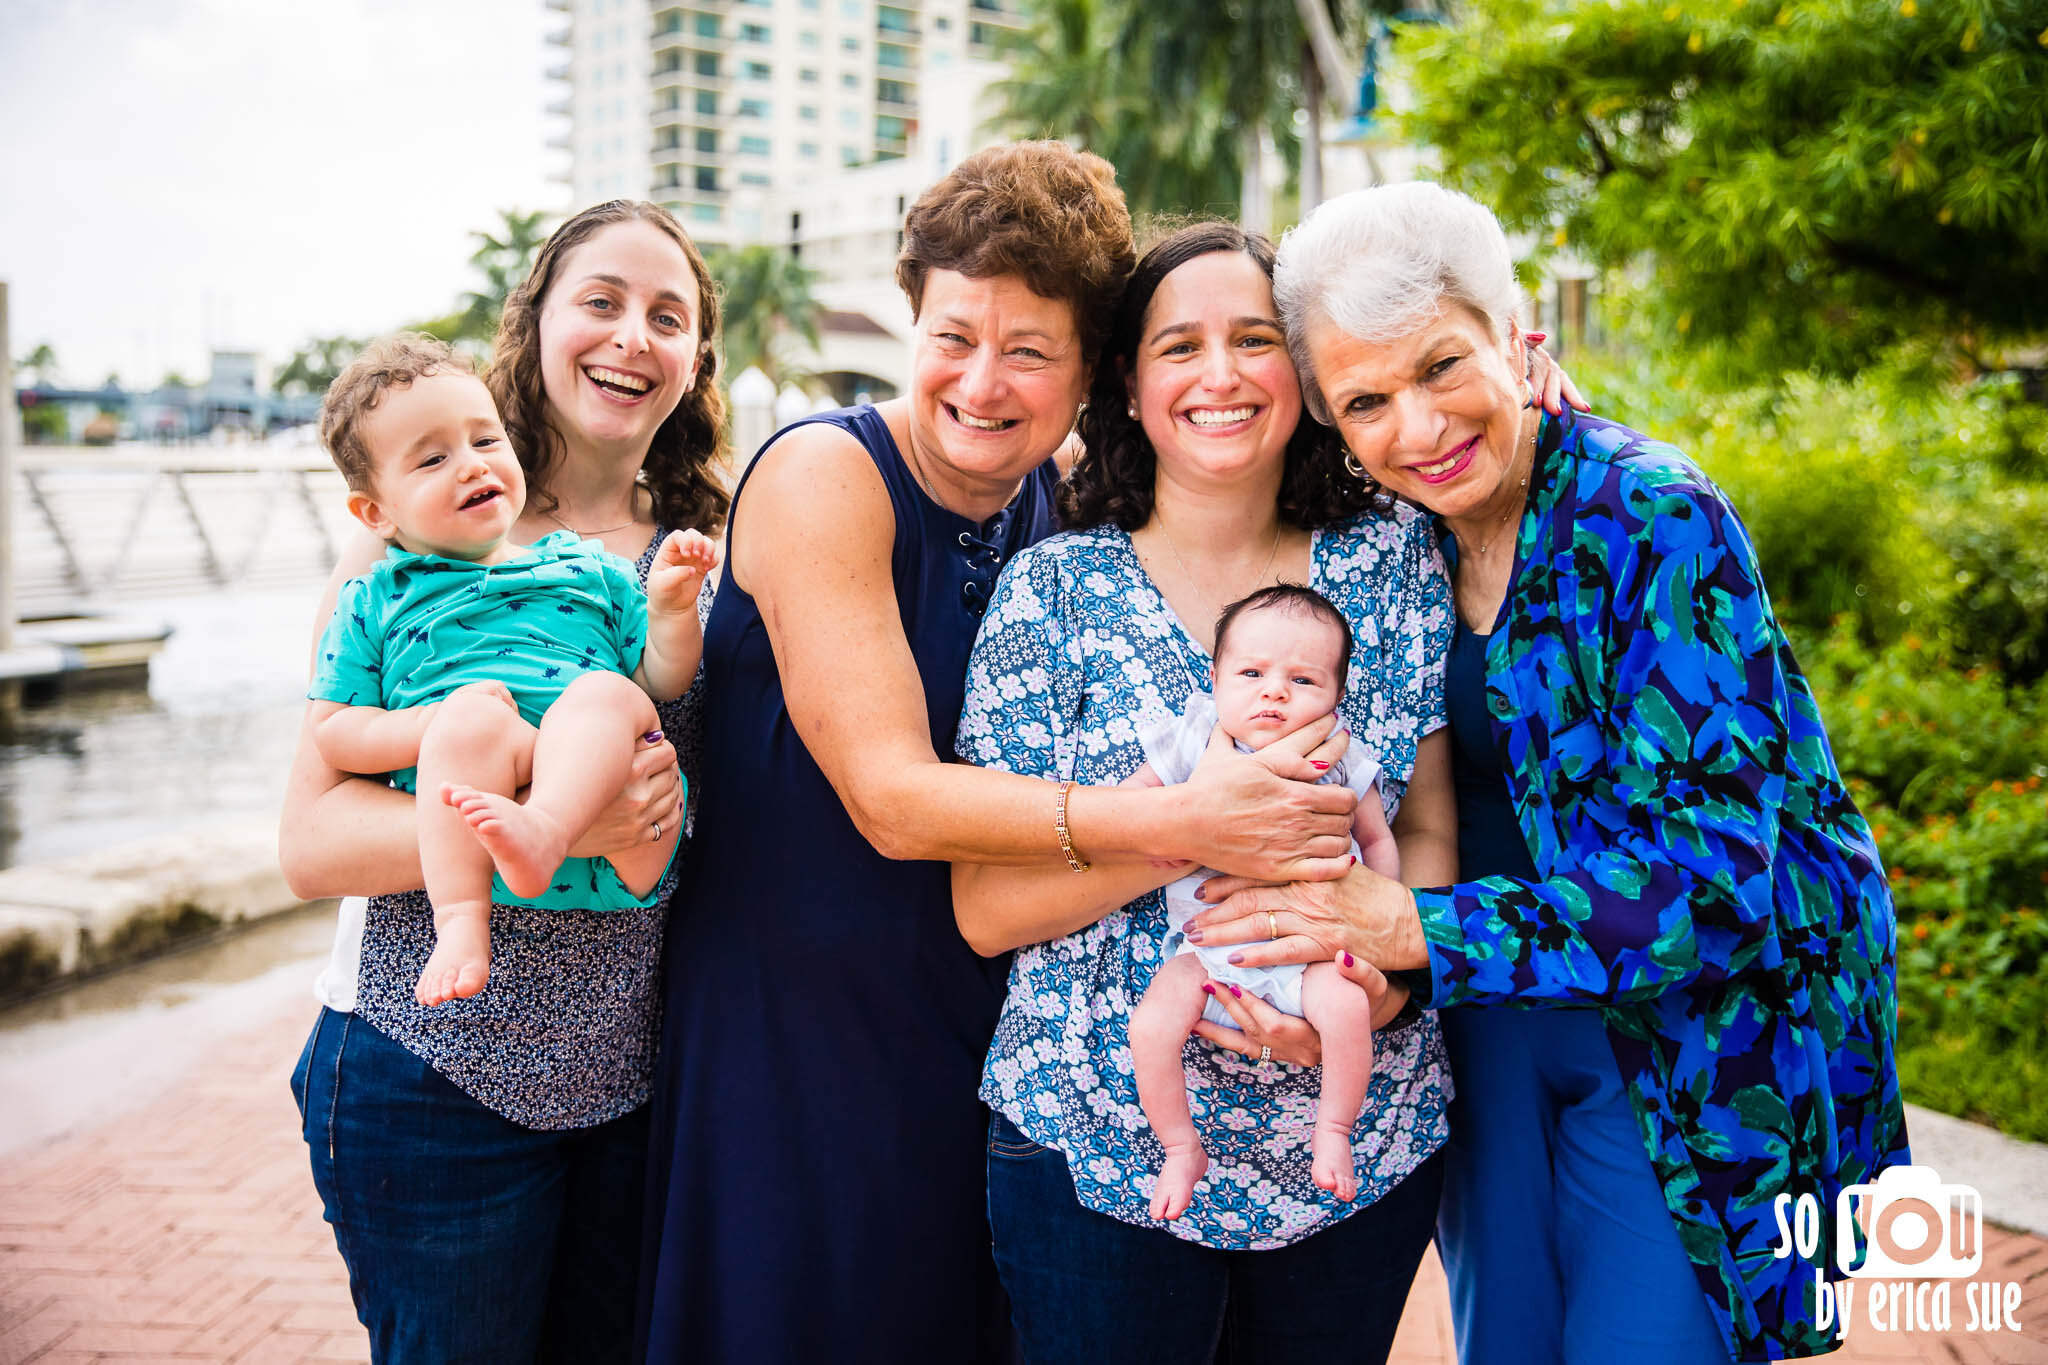 5-so-you-by-erica-sue-riverwalk-ft-lauderdale-extended-family-newborn-photographer-CD8A6804.jpg